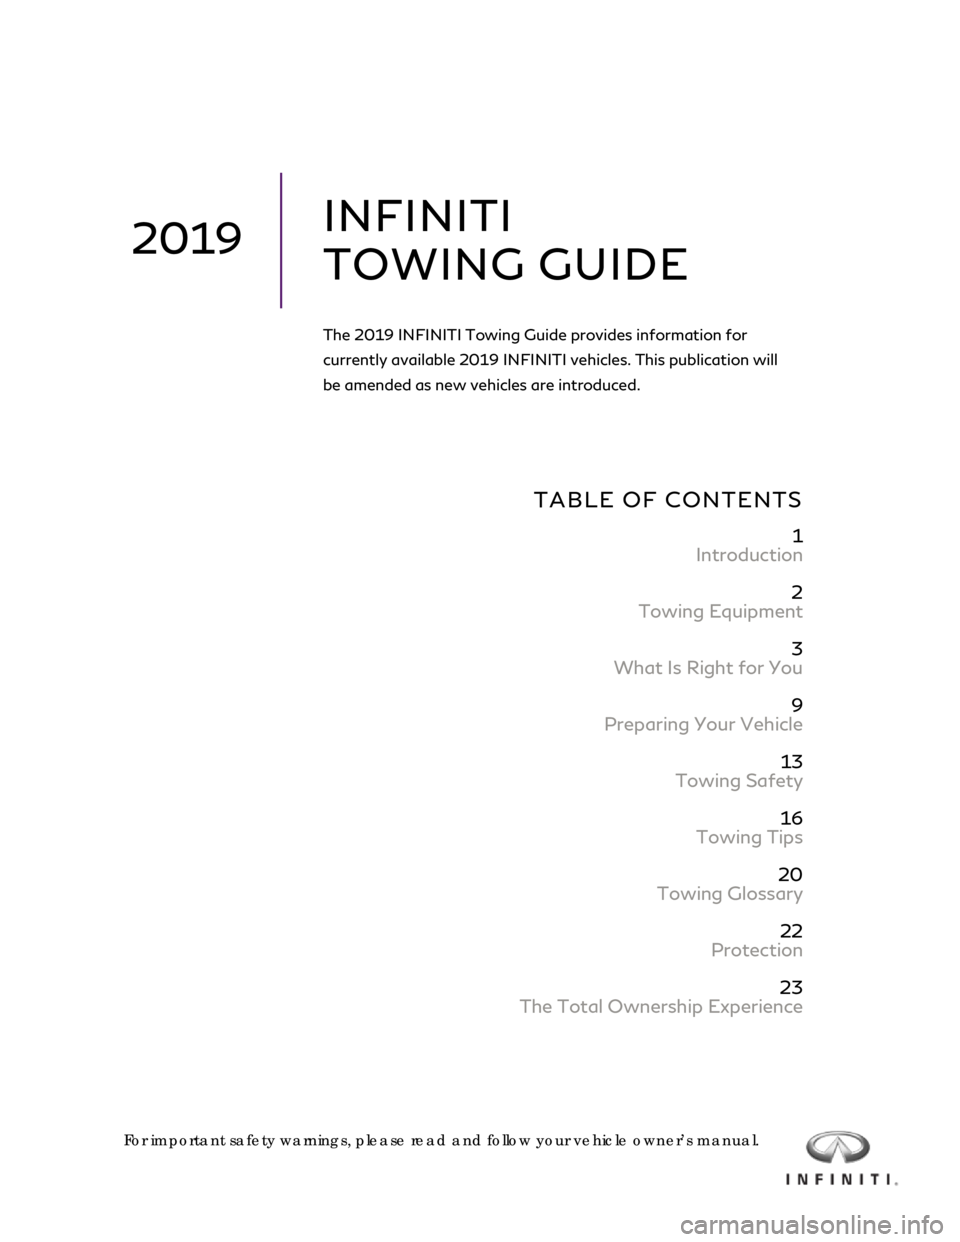 INFINITI Q60 COUPE 2019  Towing Guide   
 
 
 
 
 
 
 
 
 
TABLE OF CONTENTS  
 
1 
Introduction 
 
2 
Towing Equipment 
 
3 
What Is Right for You 
 
9 
Preparing Your Vehicle 
 
13 
Towing Safety 
 
16 
Towing Tips 
 
20 
Towing Glossar